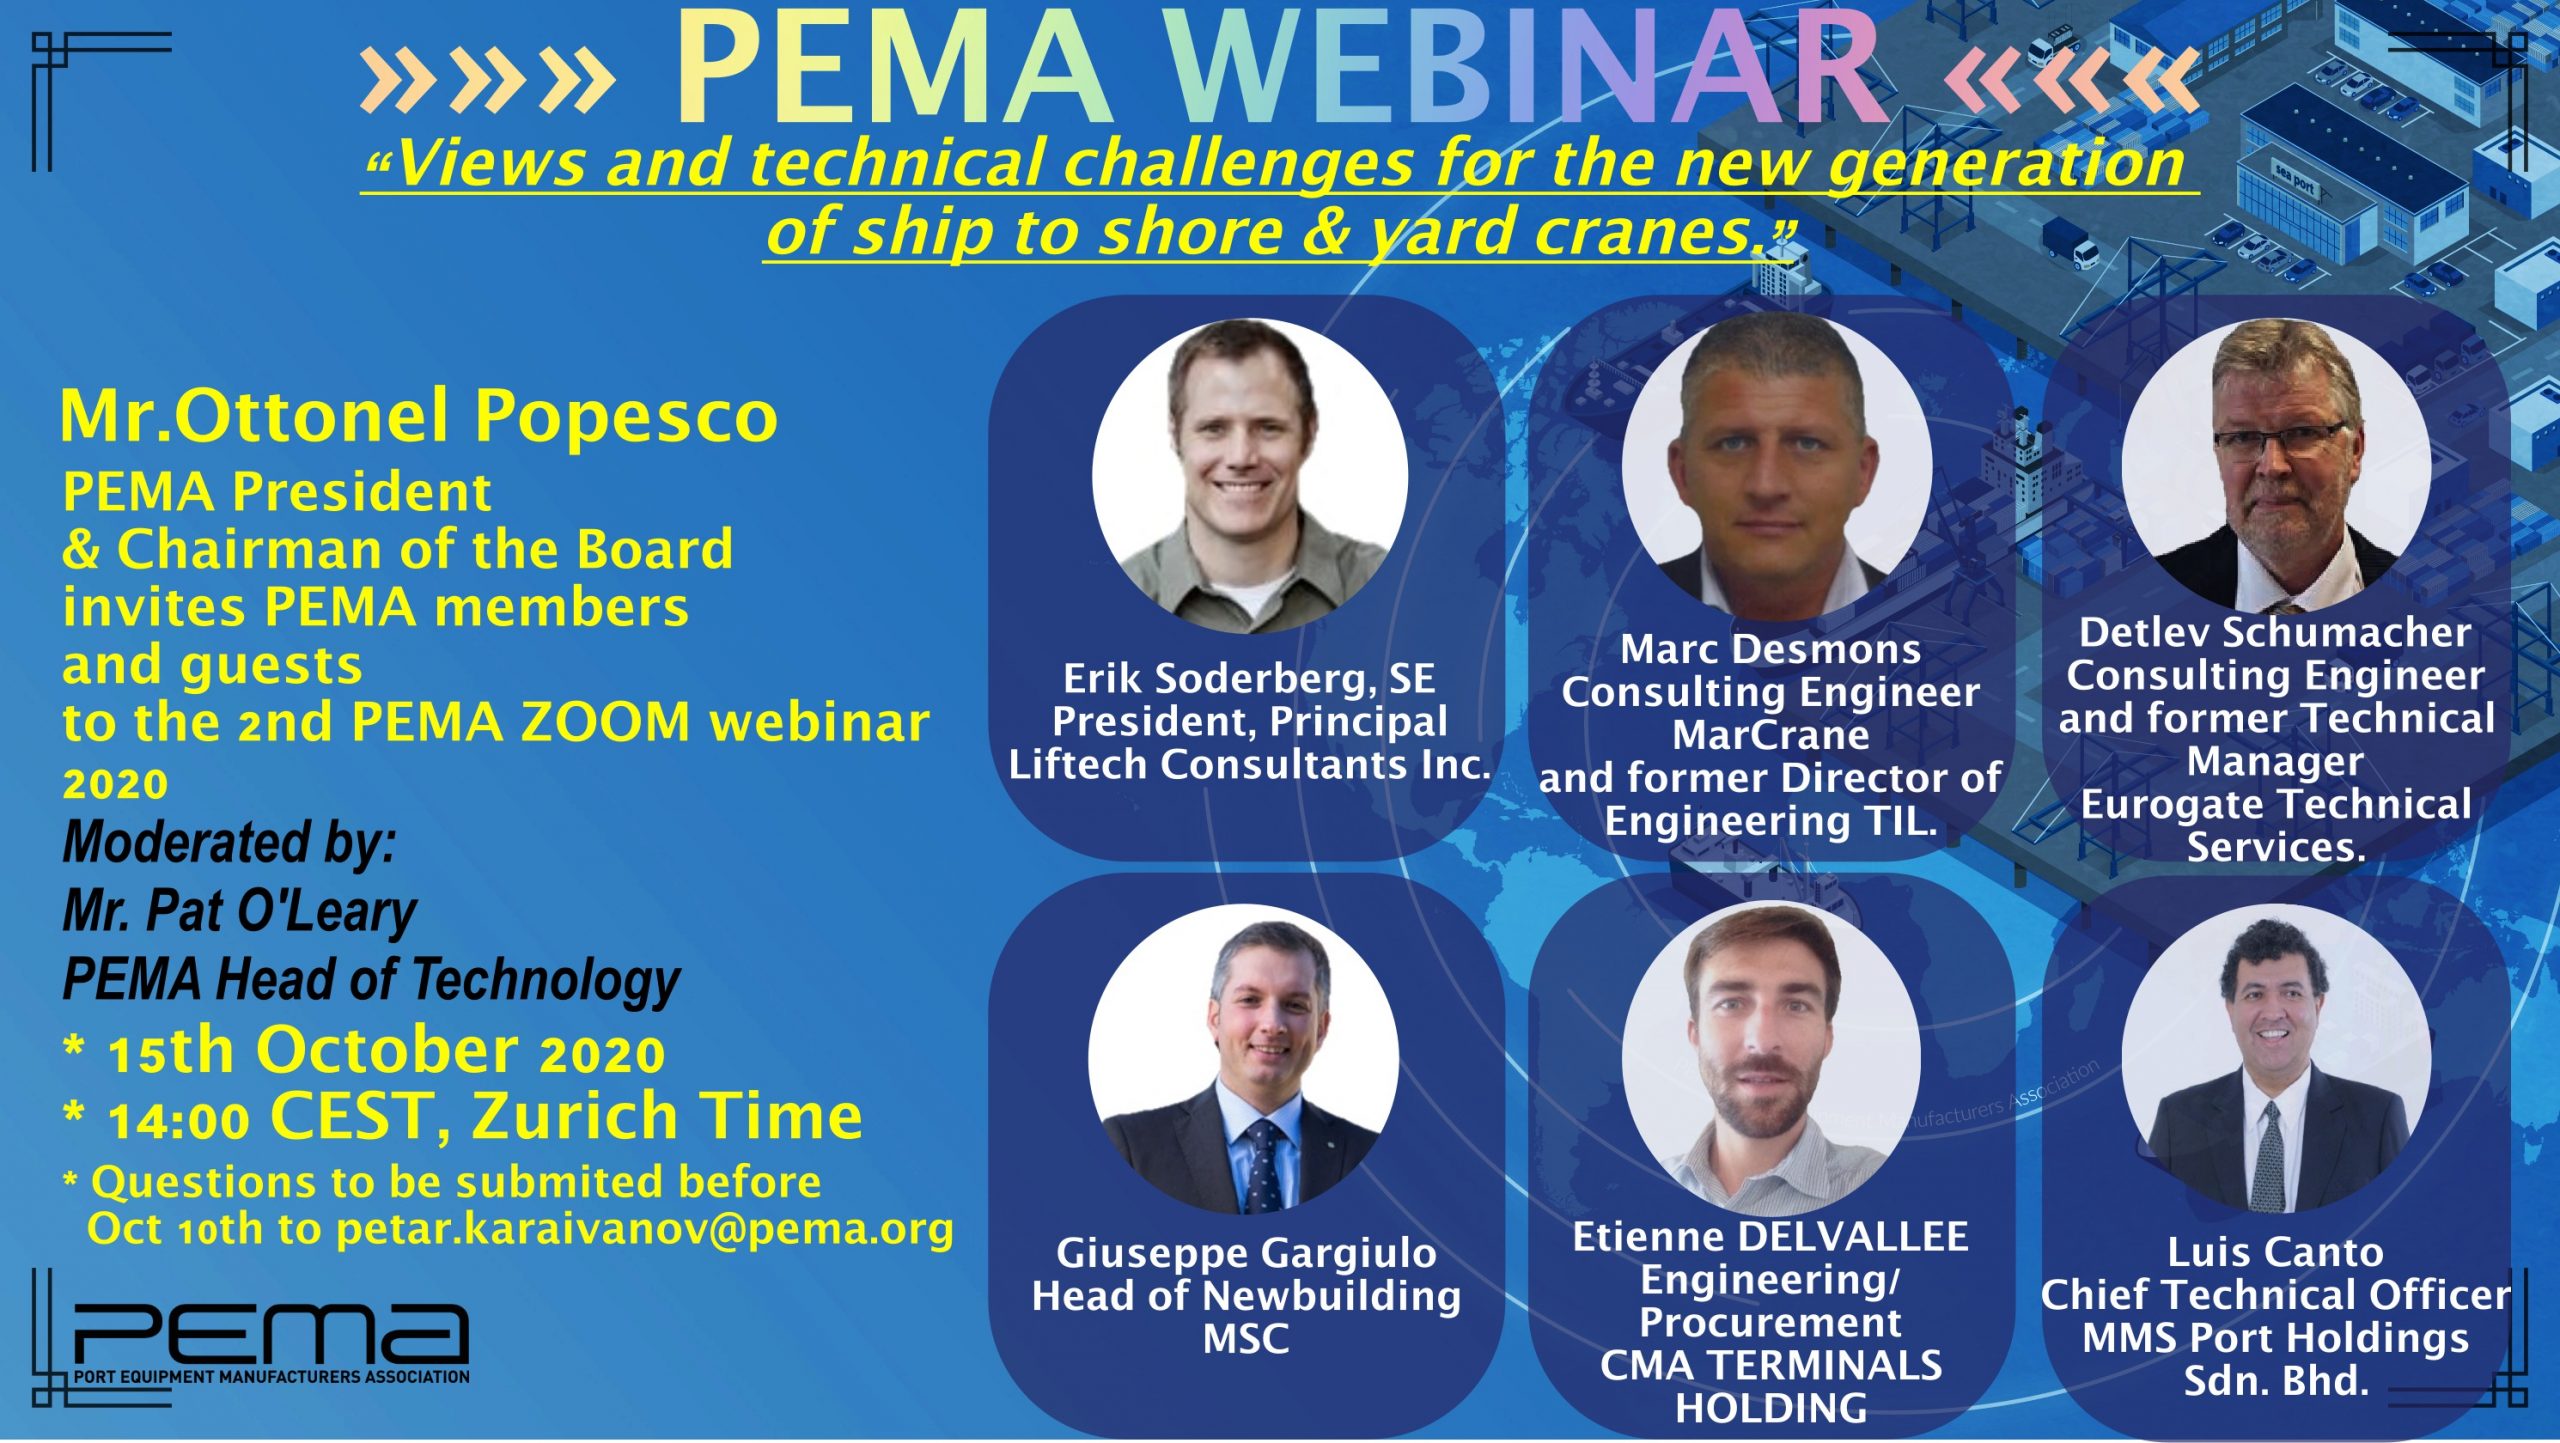 PEMA to host webinar exploring the Views and technical challenges for the new generation of ship to shore and yard cranes